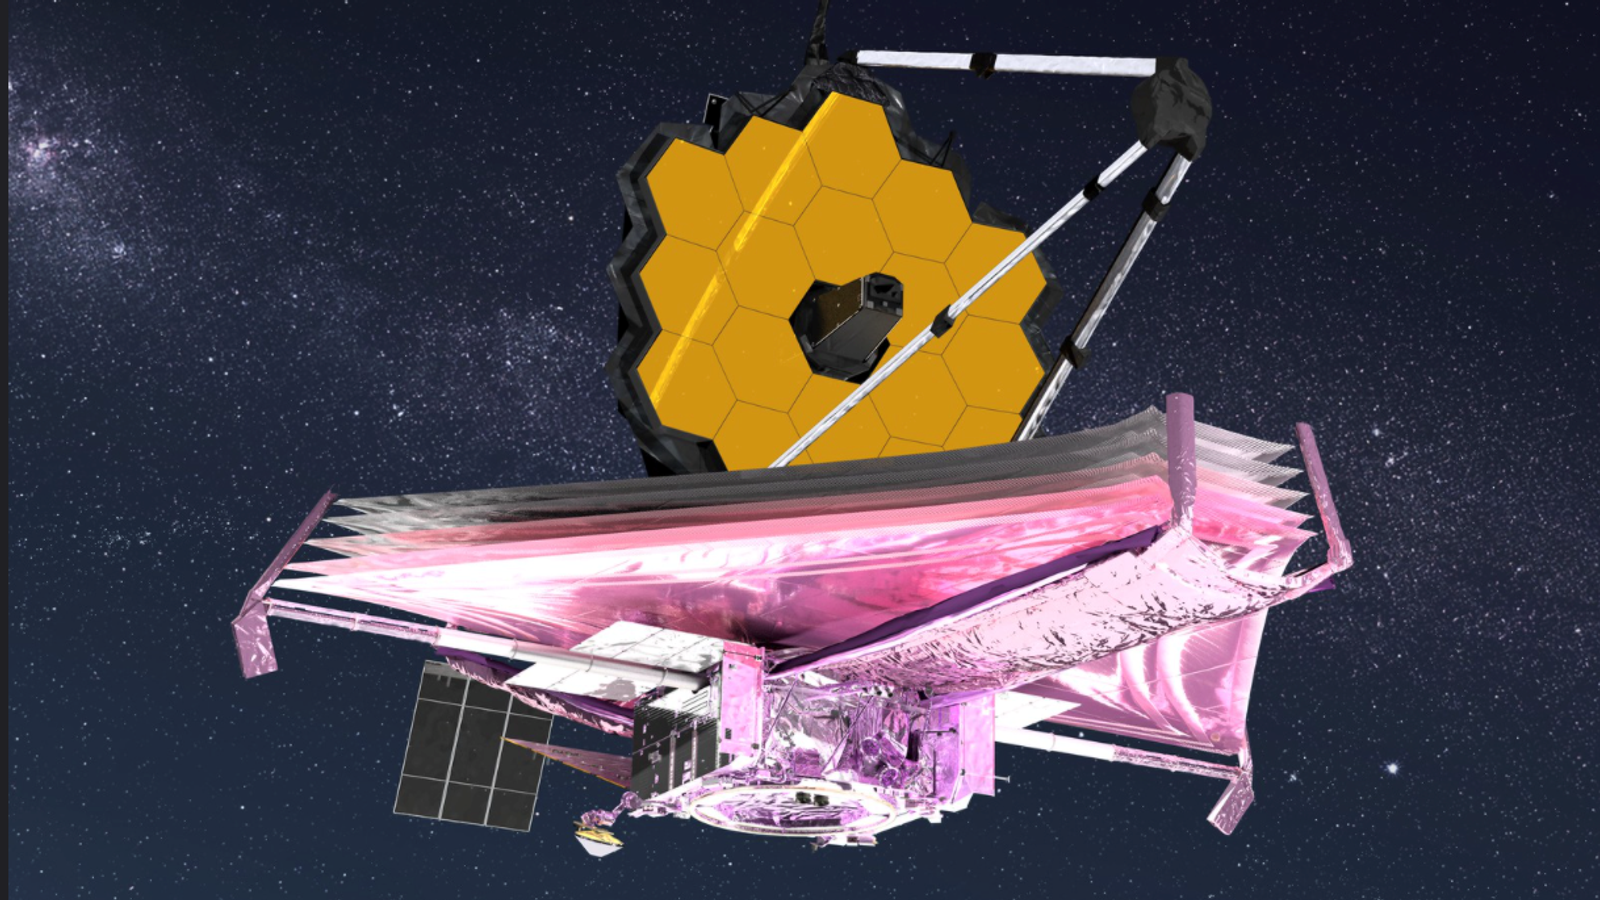 James Webb Telescope fires thrusters to reach final stop a million miles from Earth and begins orbit around sun